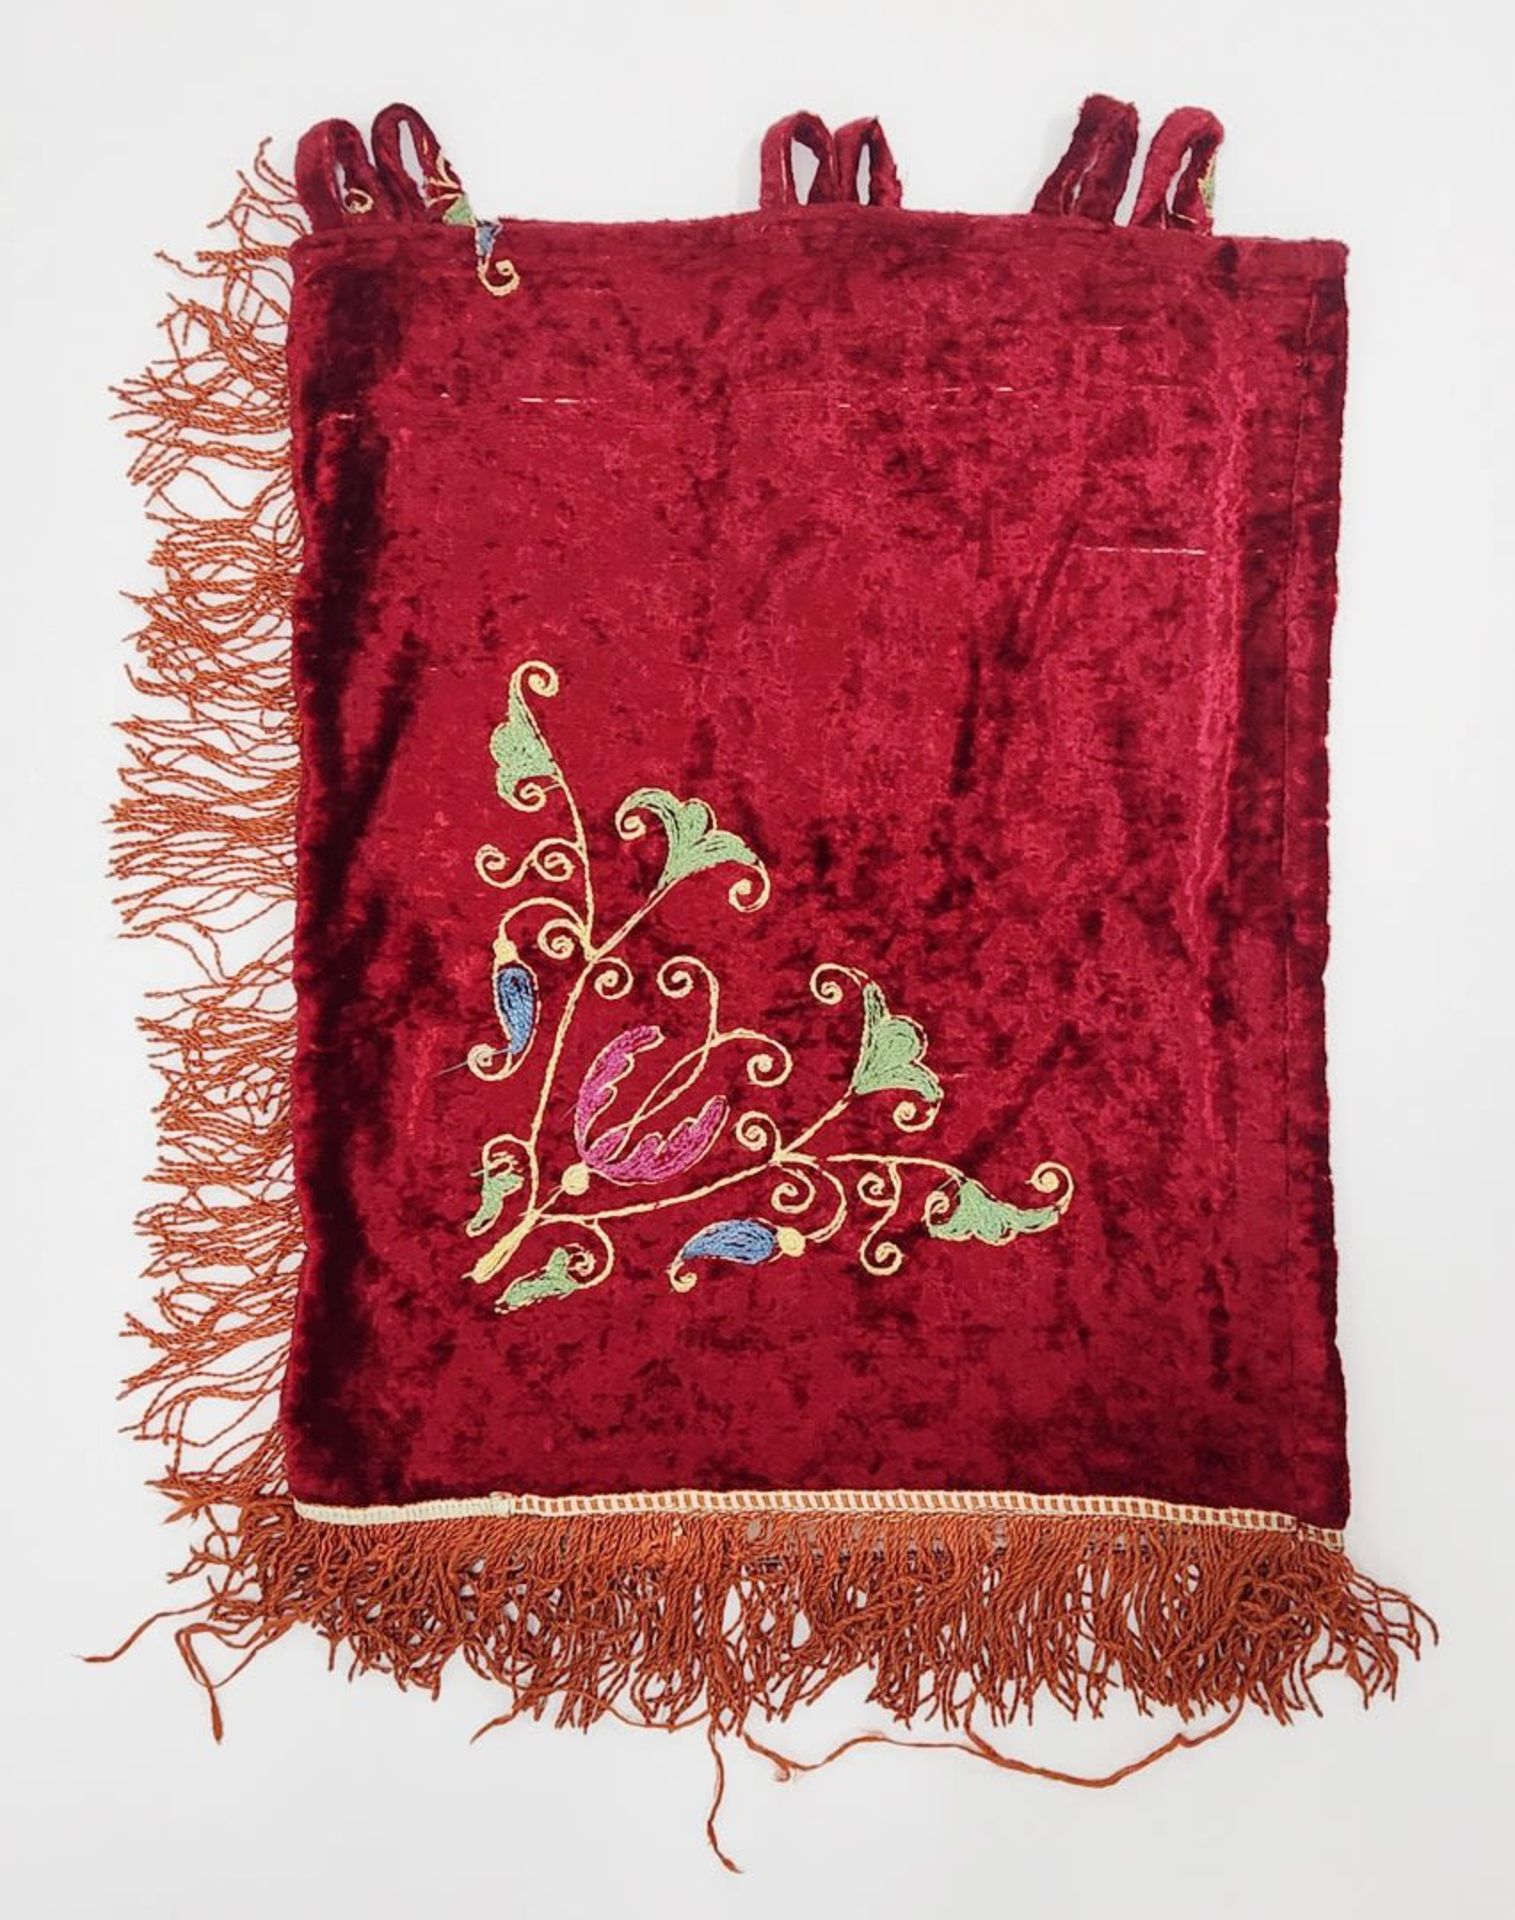 A Torah scroll coat, decorated with cotton thread weaving on red velvet and red fabric strands, - Image 2 of 7